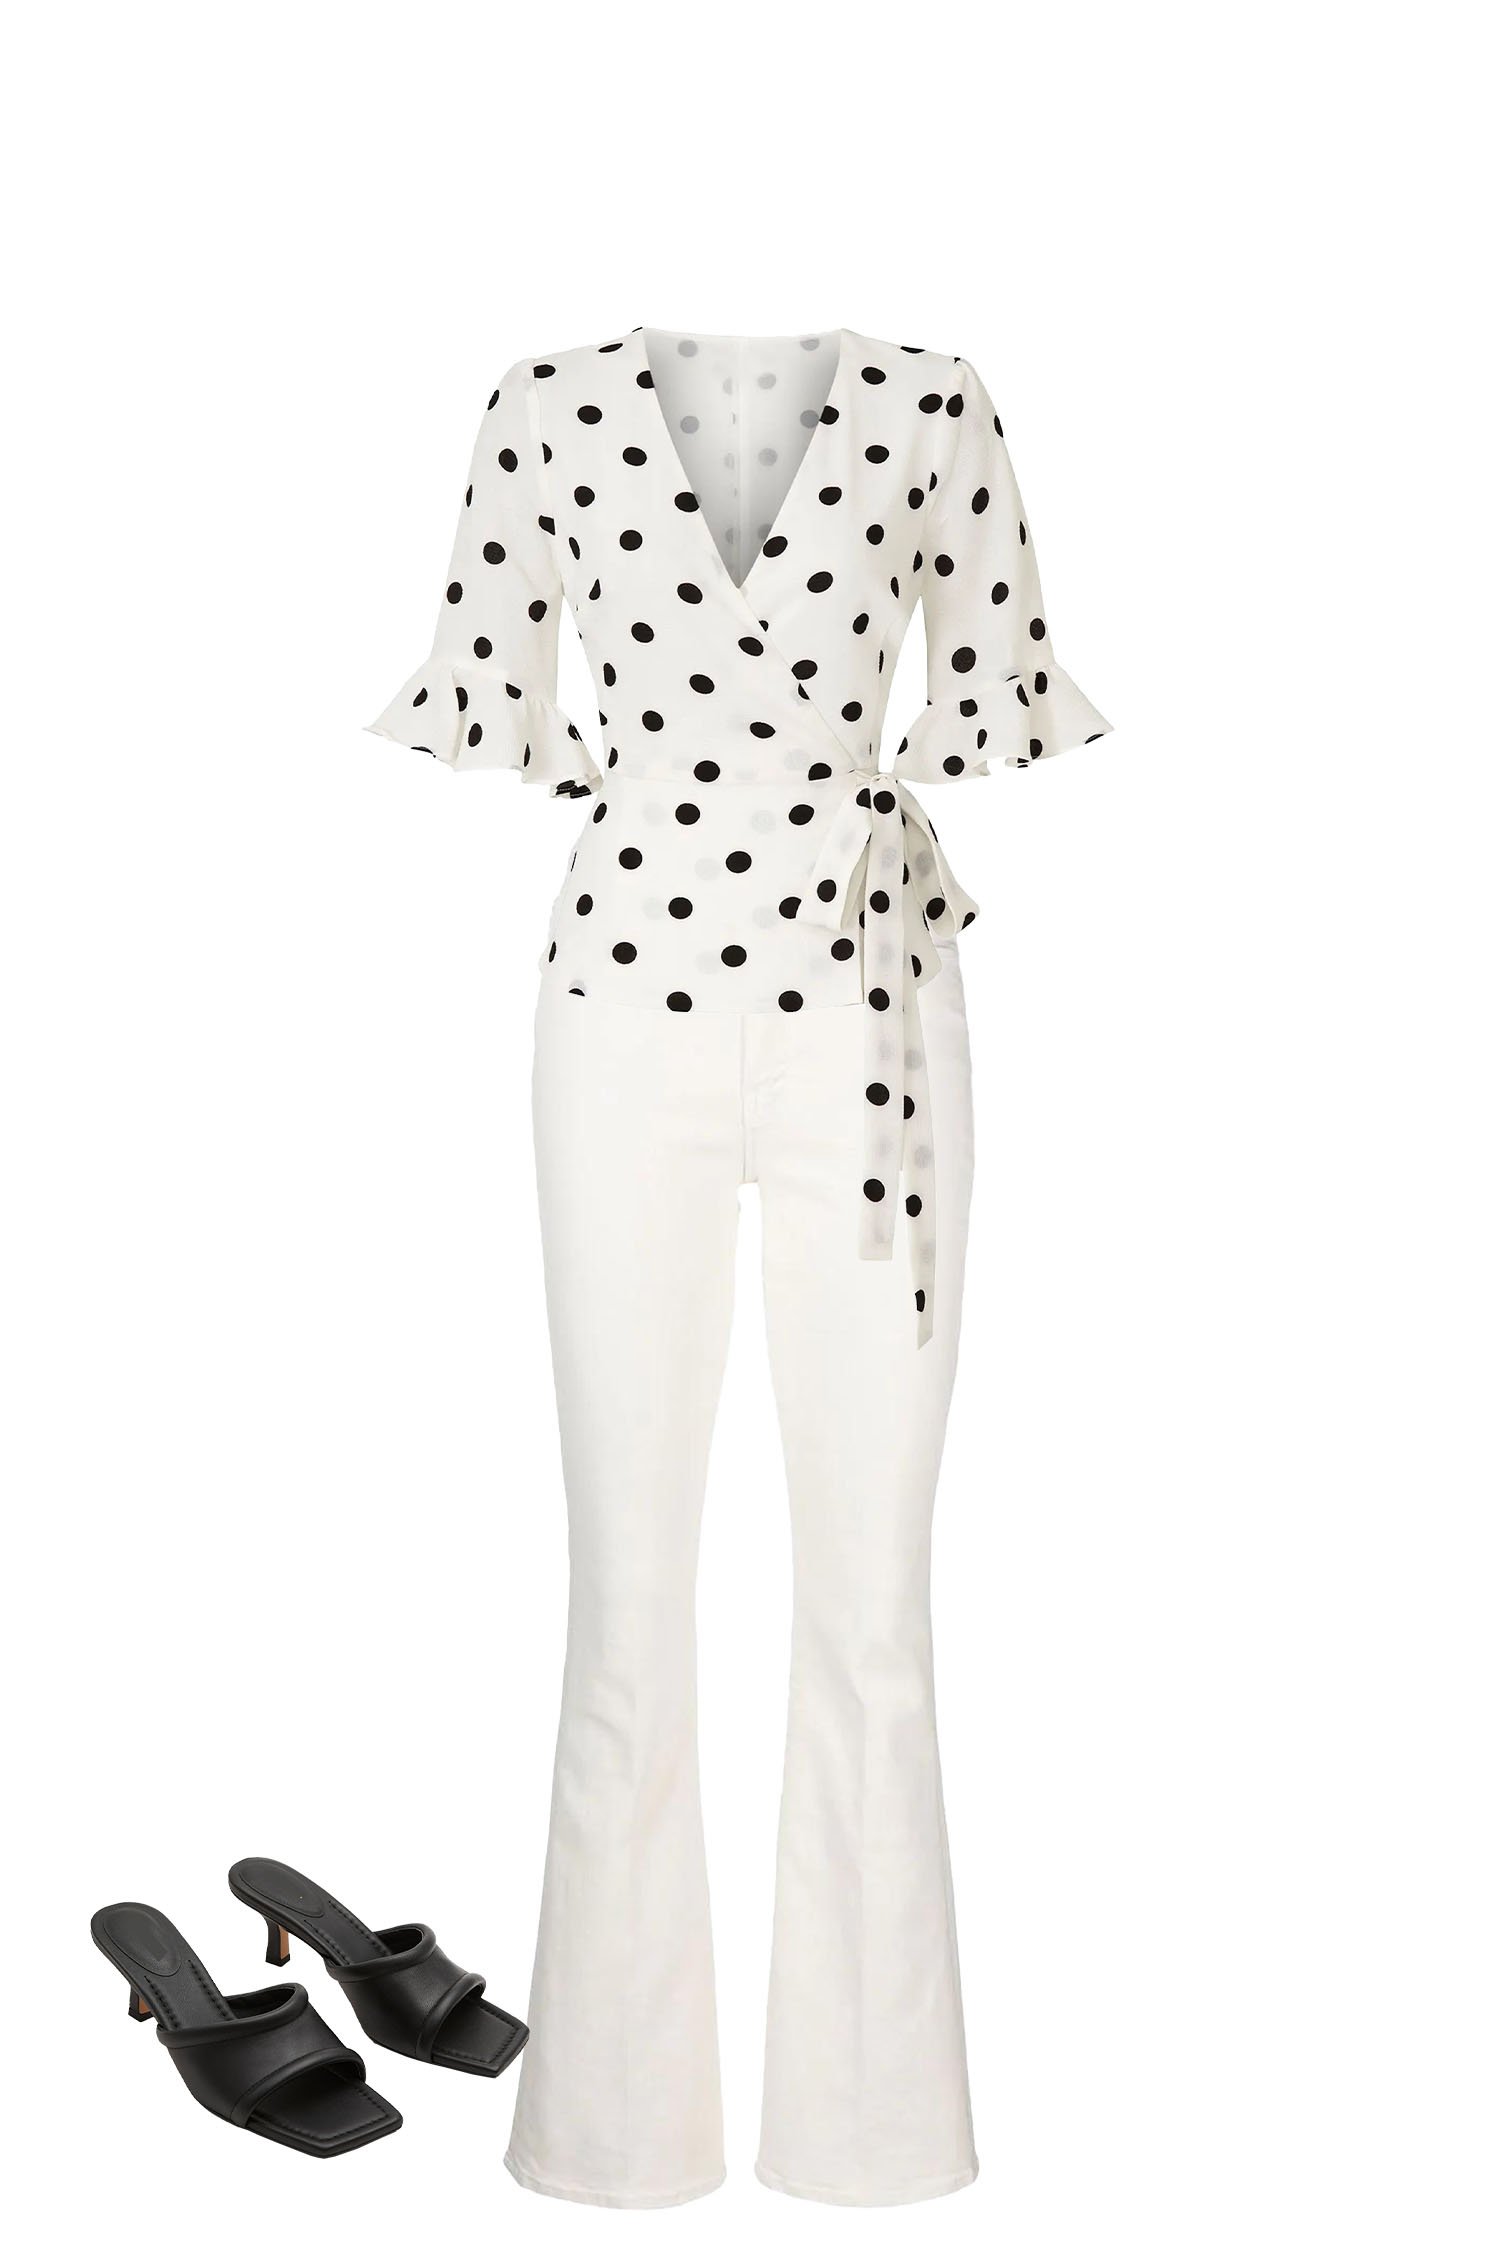 White High Waisted Flare Jeans Outfit with White Polka Dot Wrap Top Black Square Toe Kitten Heel Sandals